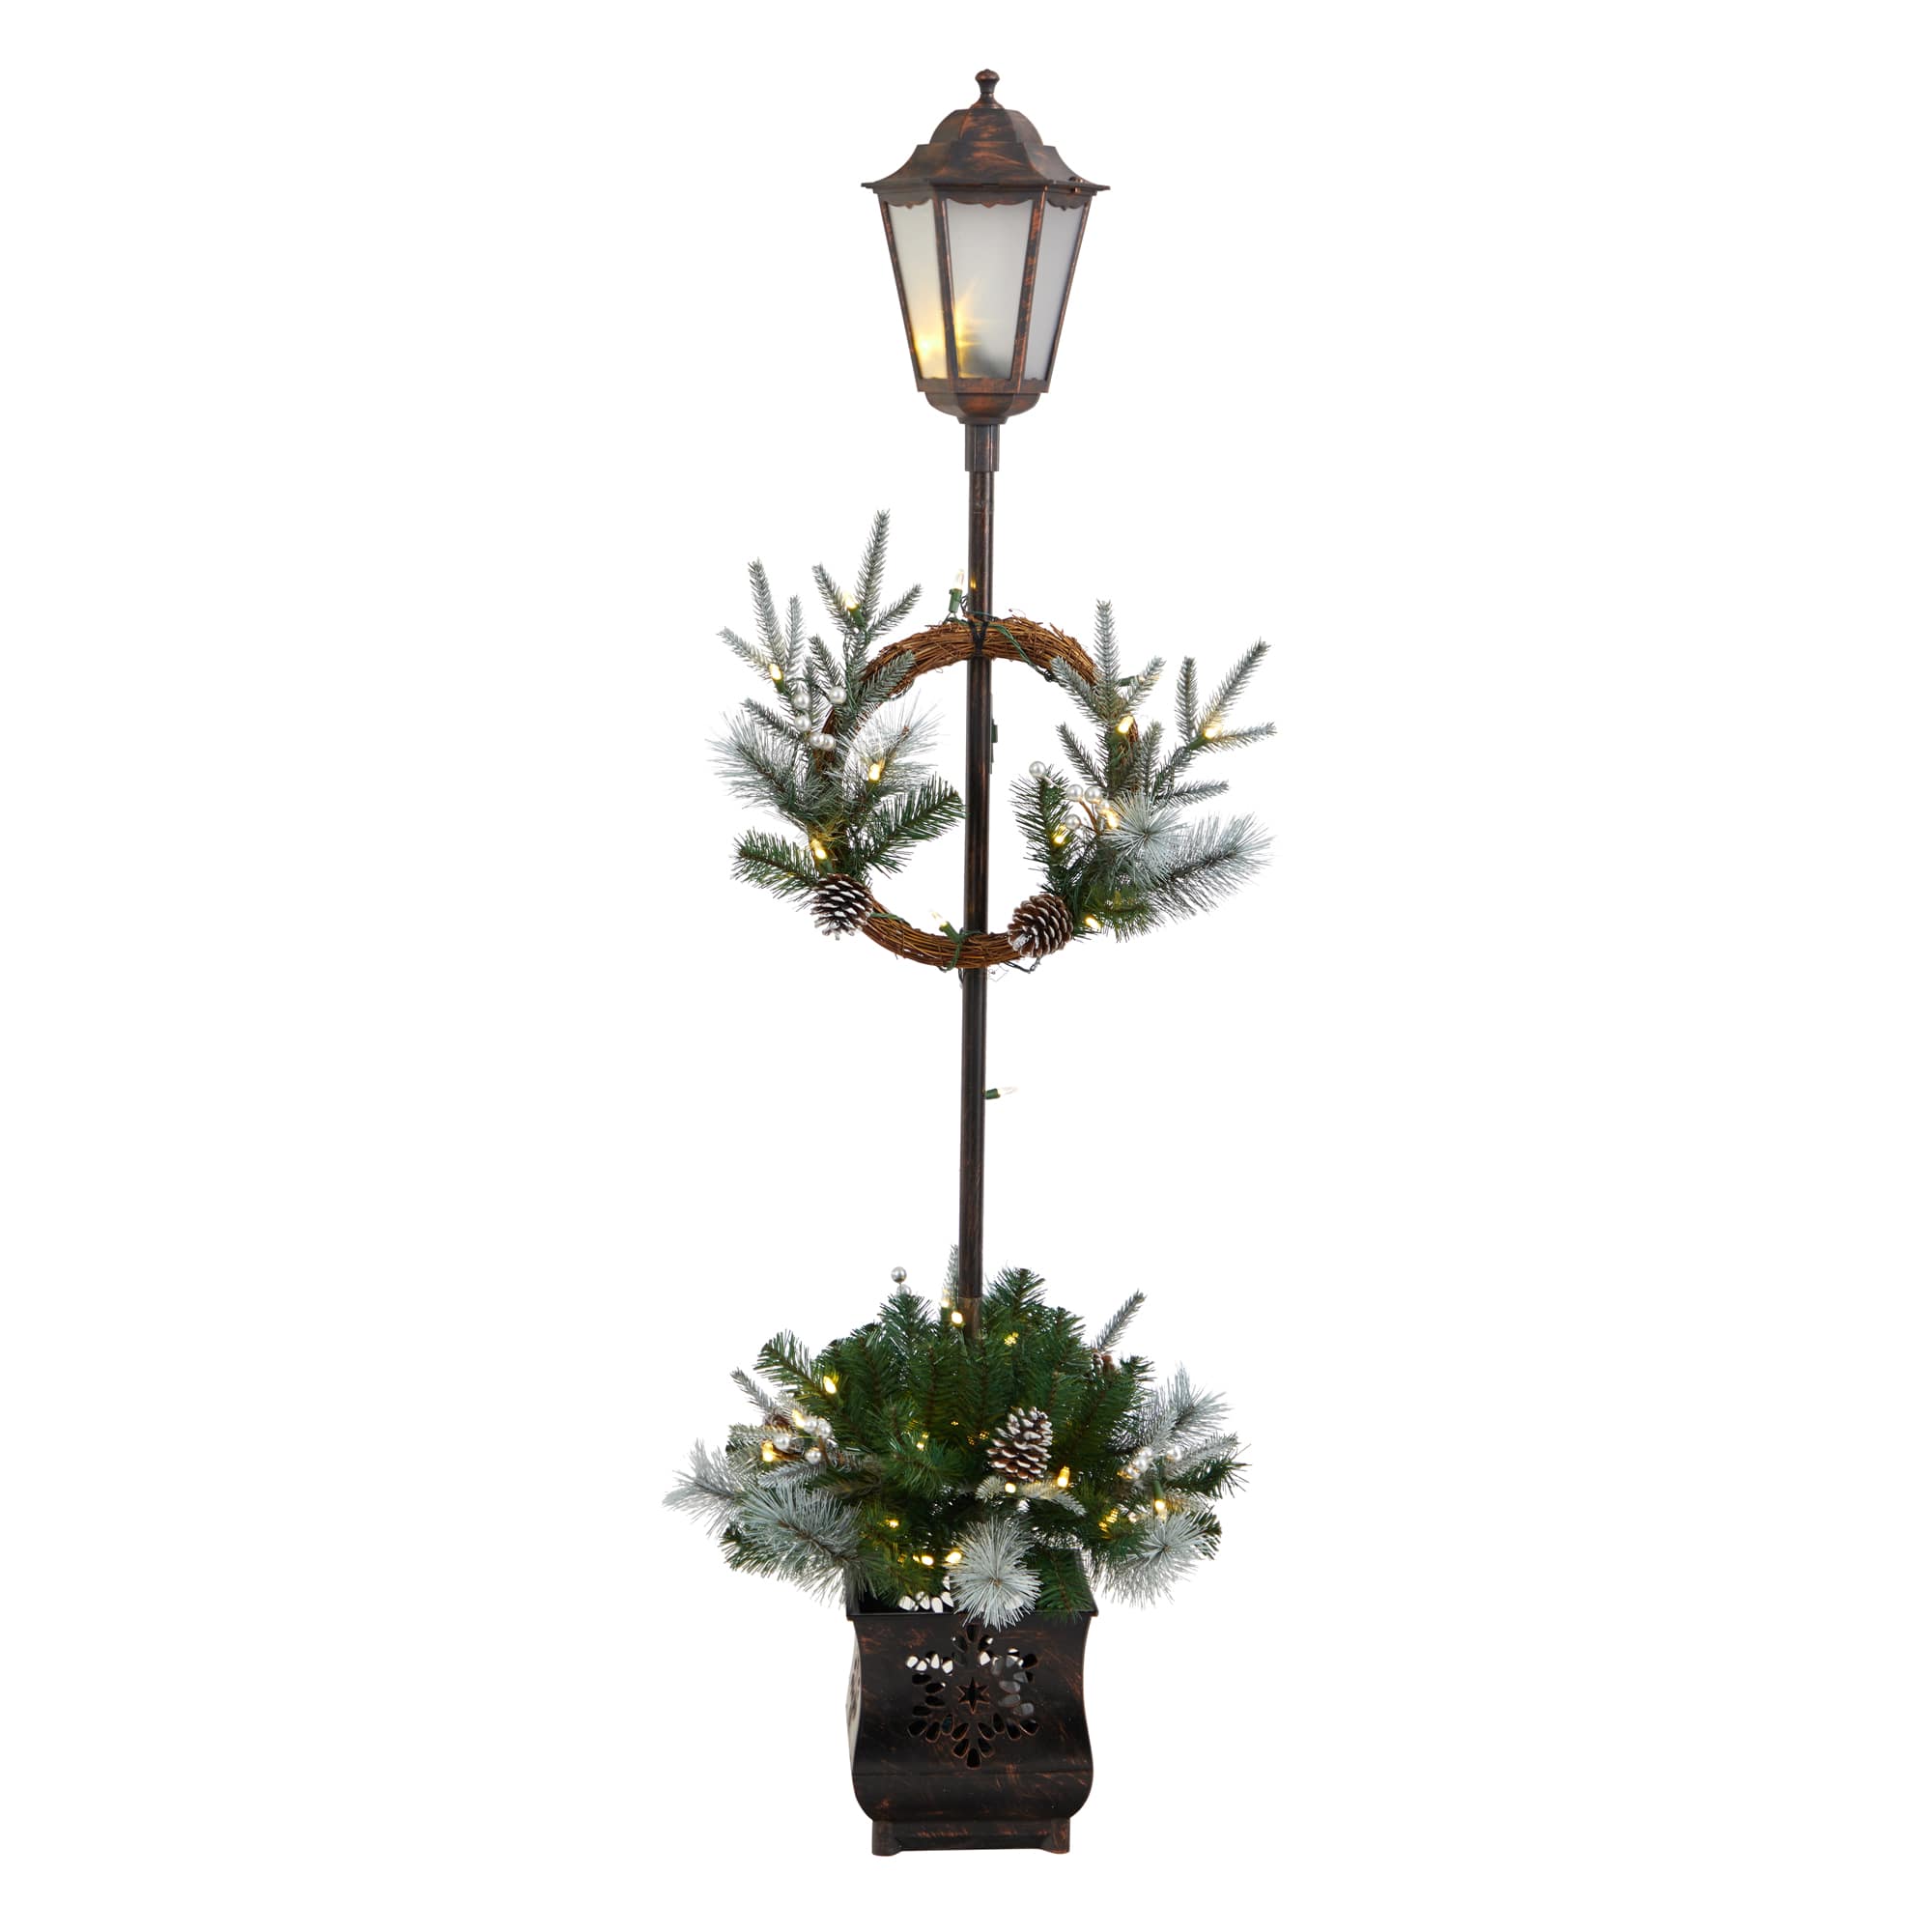 5ft. Pre-lit LED Holiday Decorated Lamp Post With Greenery In Decorative Planter